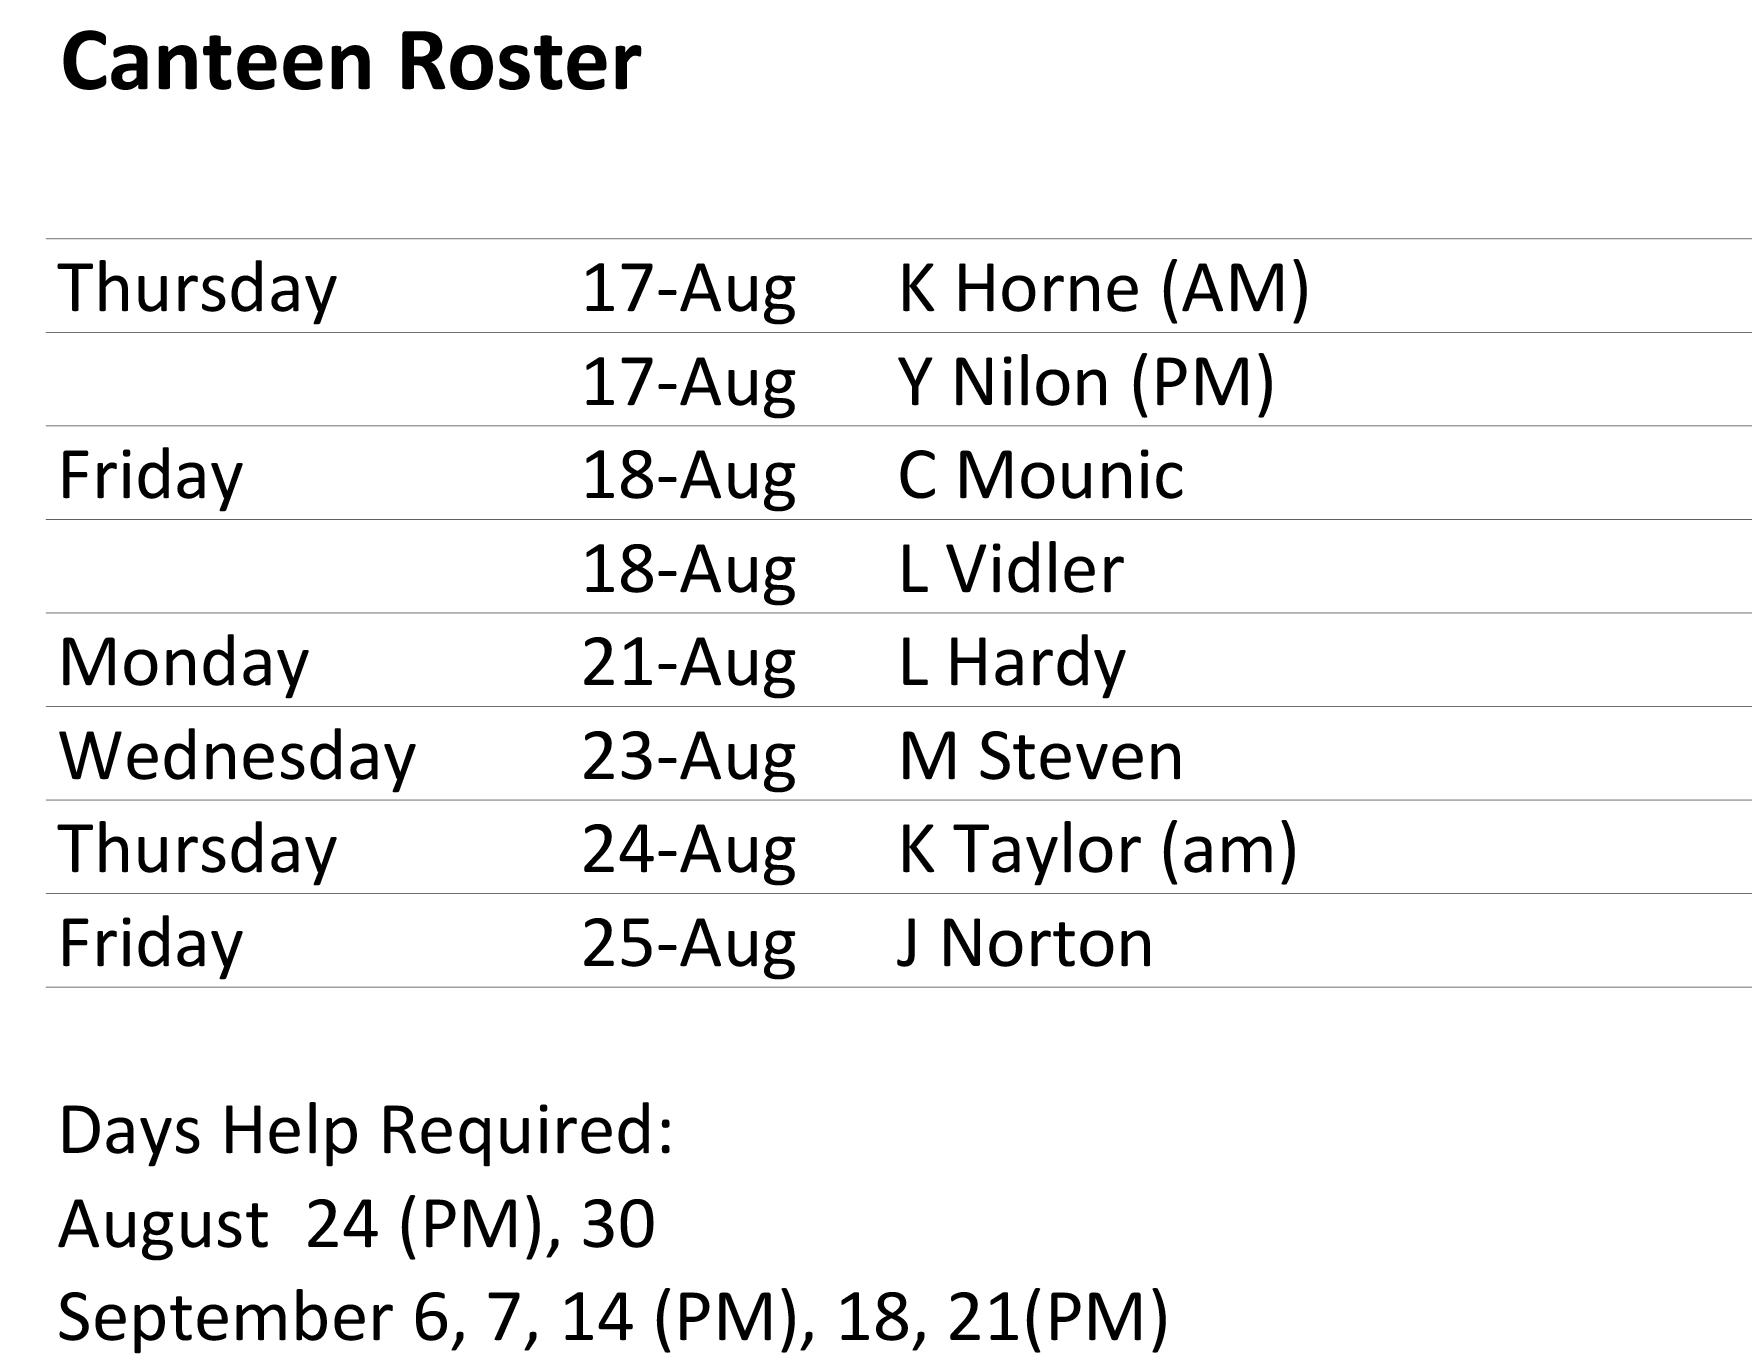 canteen roster